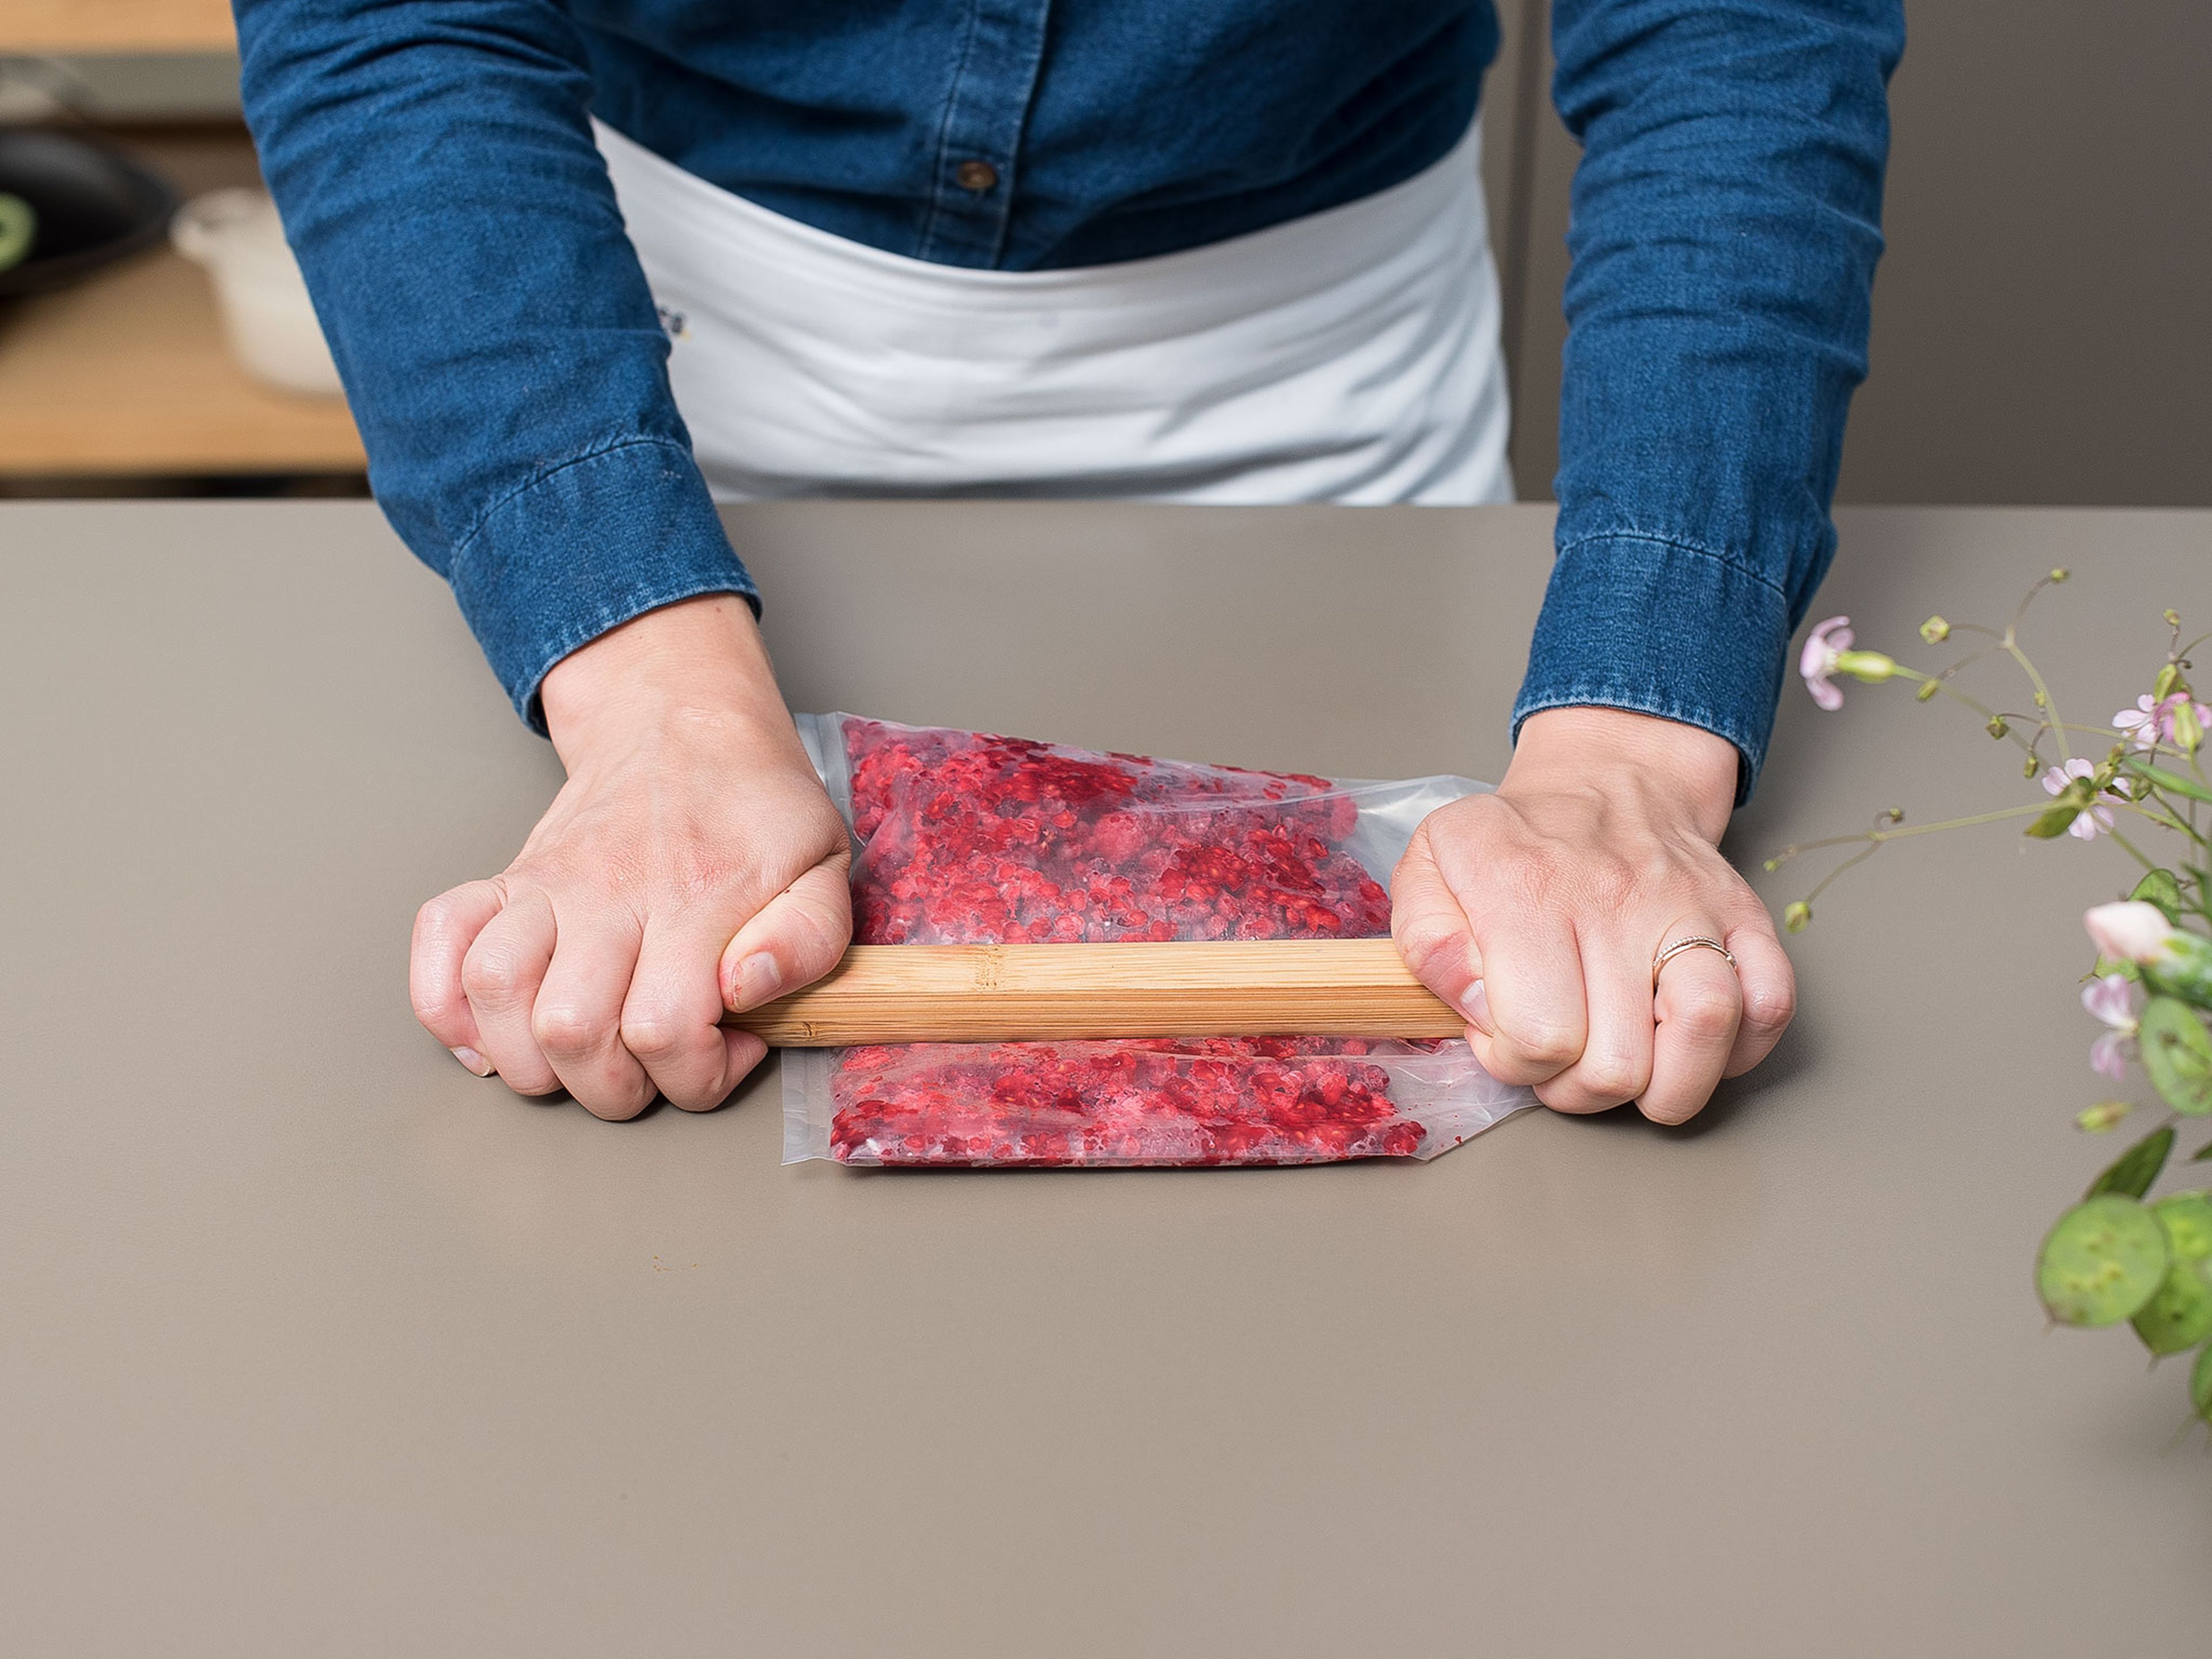 Use a rolling pin to mash up raspberries in a sealable plastic bag and add to popsicle molds, approx. 1 tbsp. per mold.